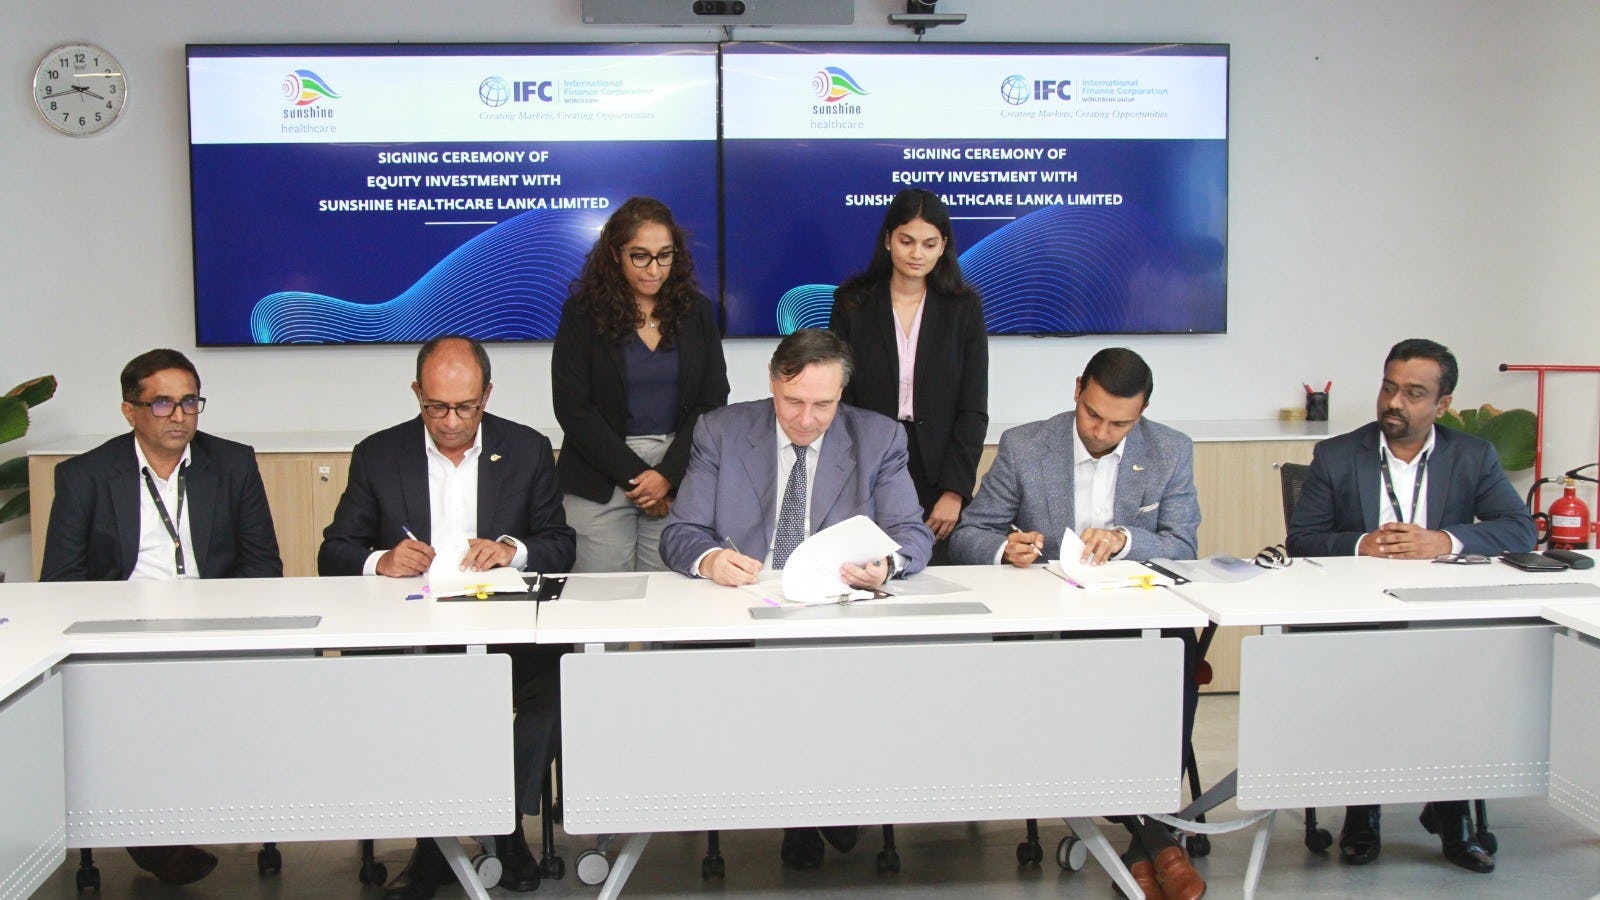 Sunshine Healthcare Lanka Ltd. agrees for investment from IFC 